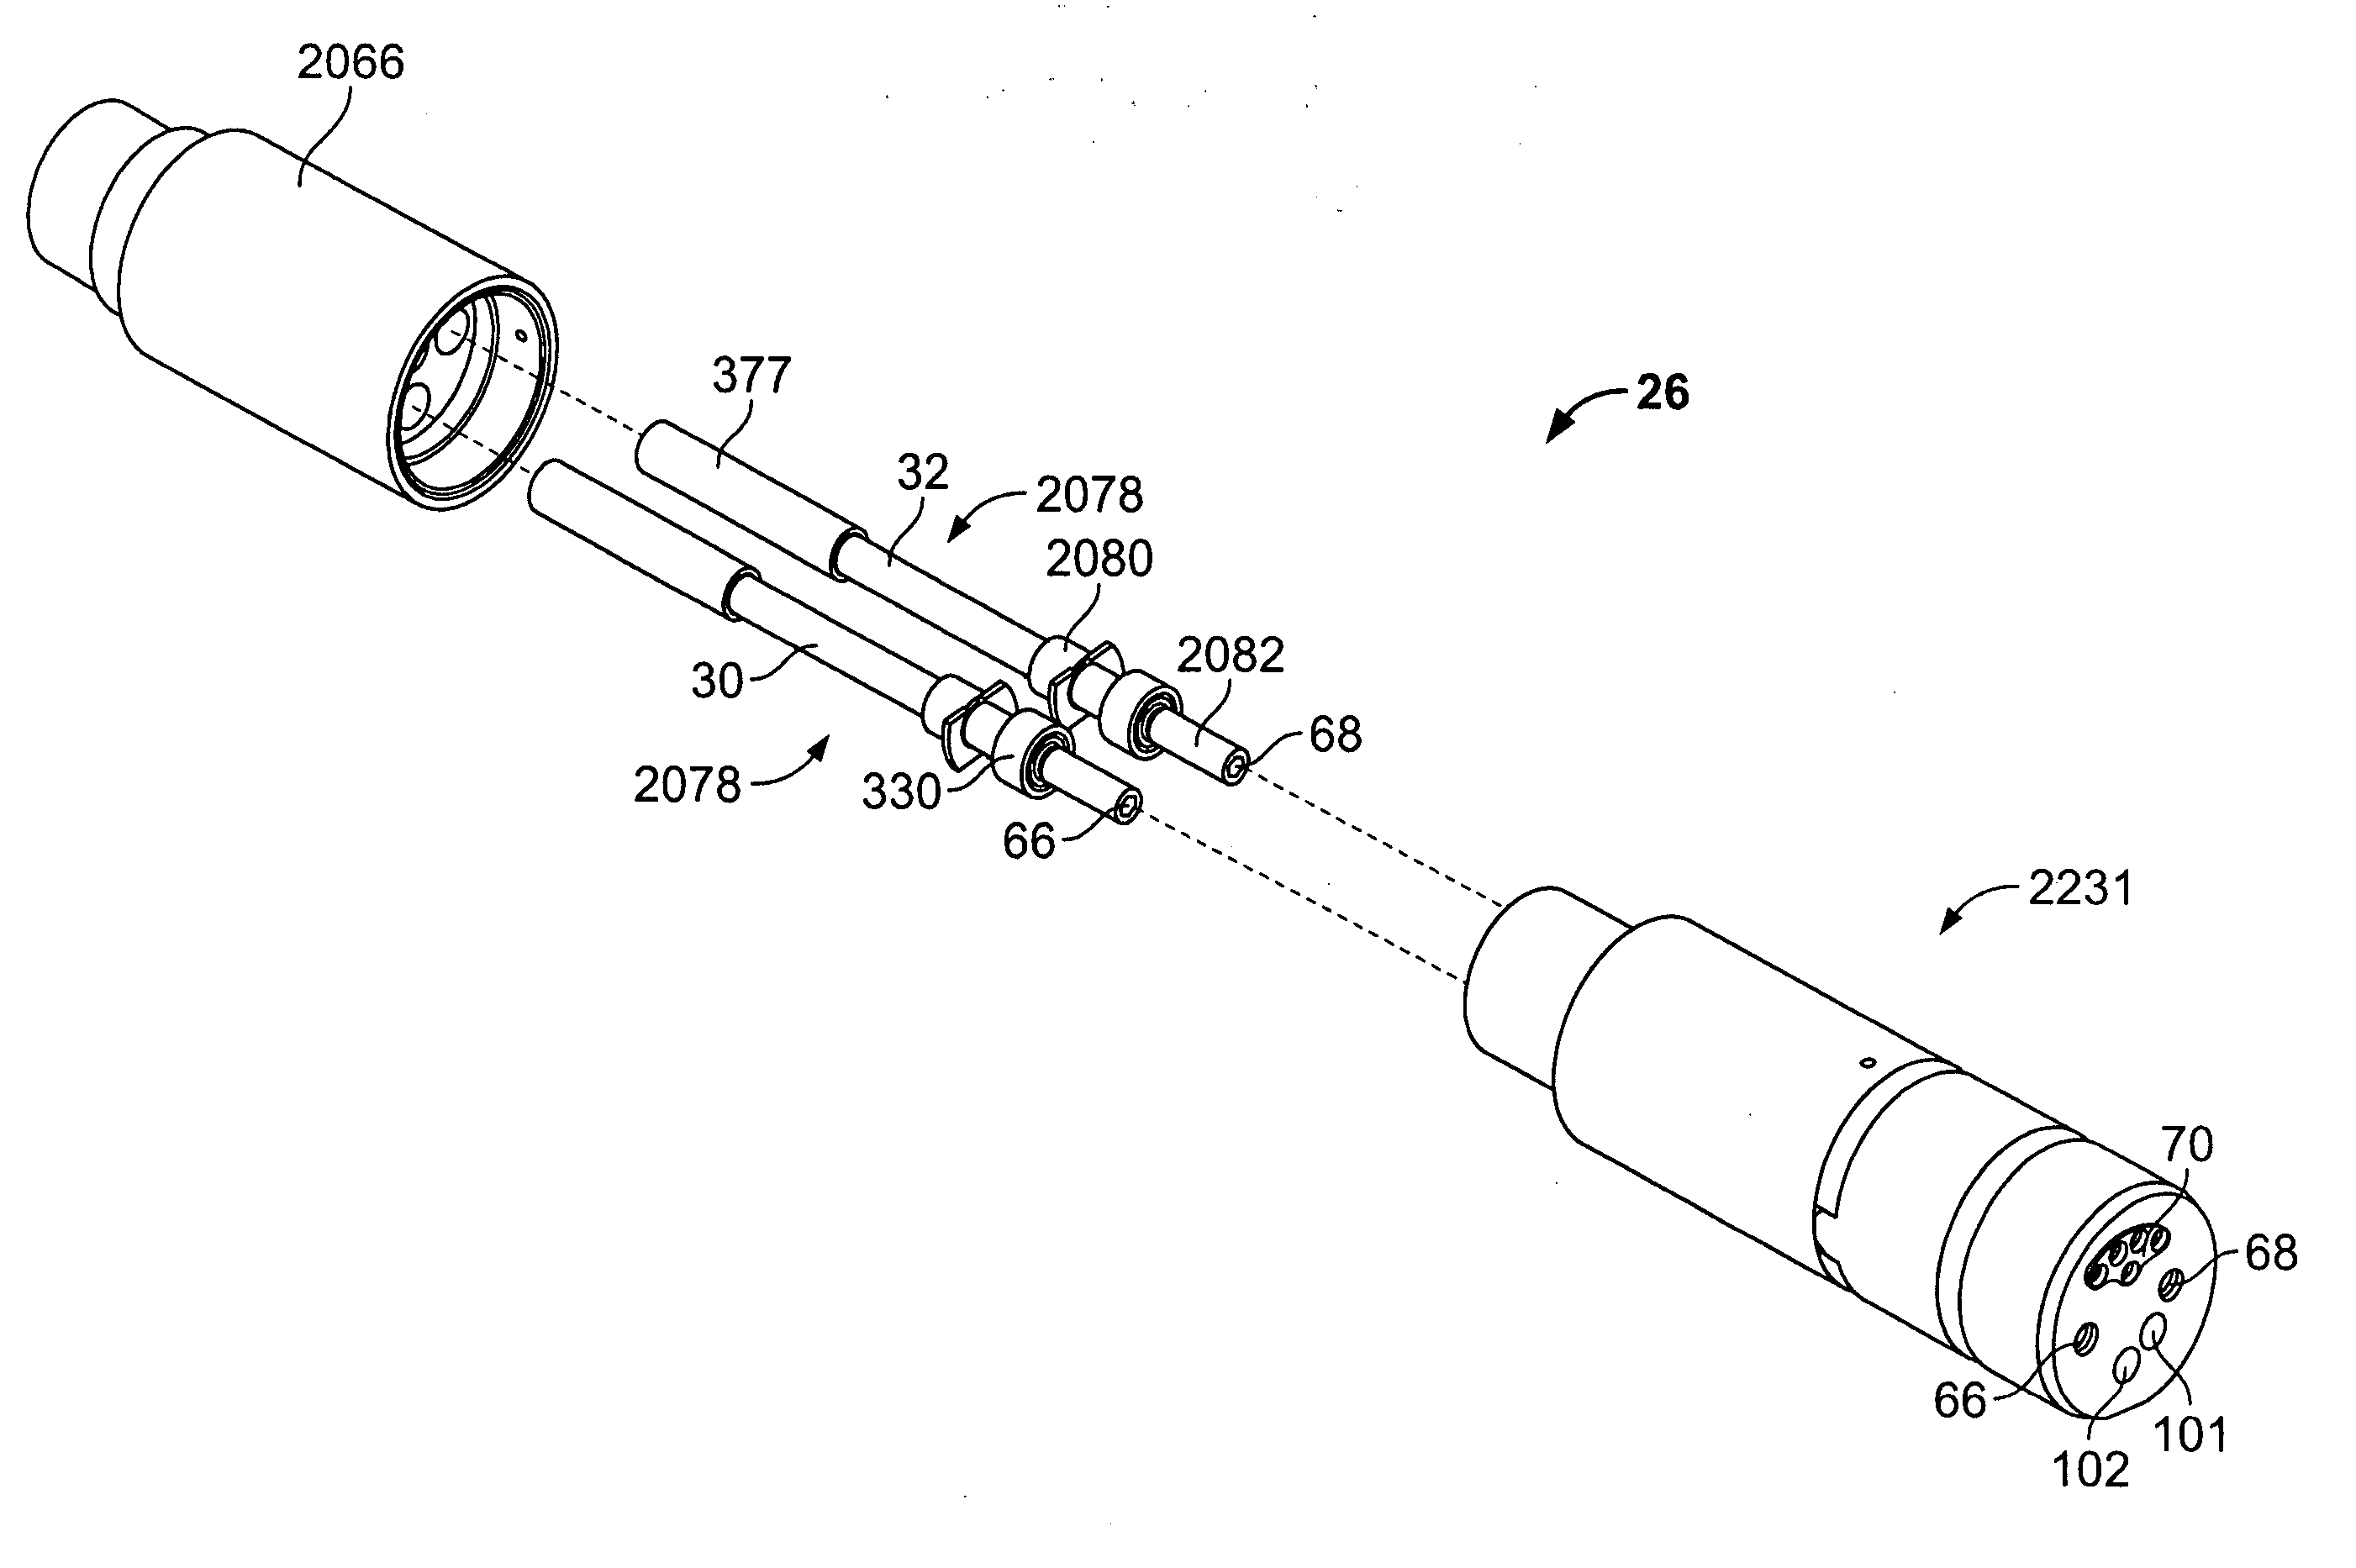 Shaft, e.g., for an electro-mechanical surgical device